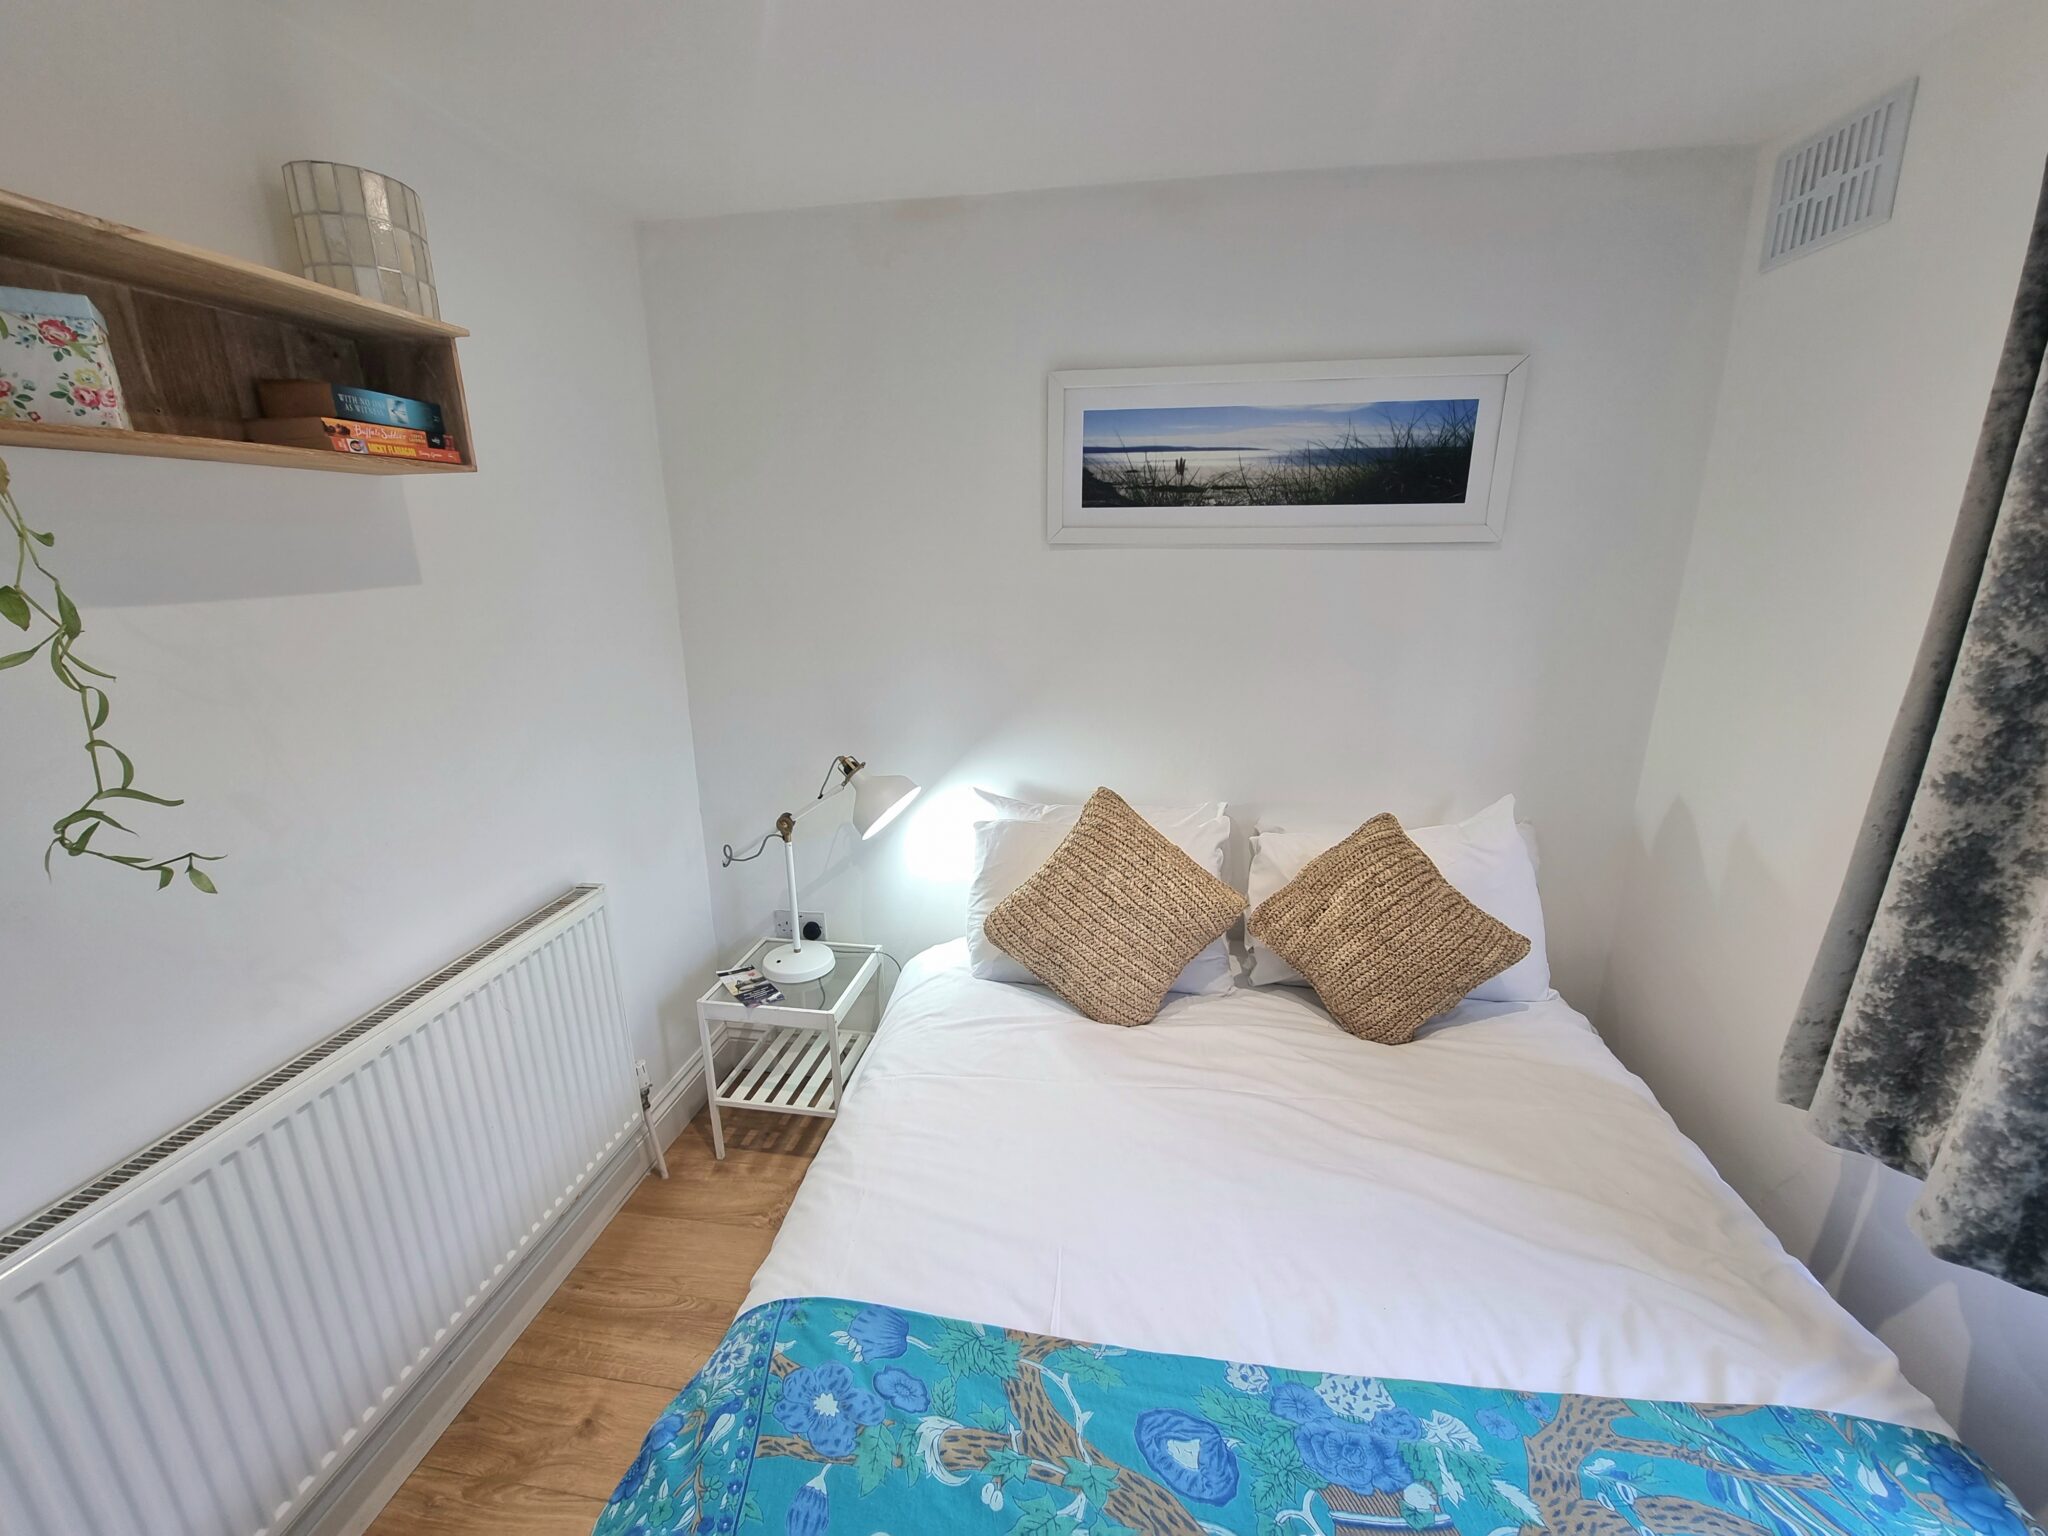 The-Best-Family-Accommodation-London-with-Parking,-private-Garden,-Wifi,-and-Smart-TY-for-Netflix.-This-4bed-3bath-Serviced-Apartment-in-Lewisham-is-only-8-min-to-London-Bridge,-and-15min-to-Charing-Cross-and-The-West-End